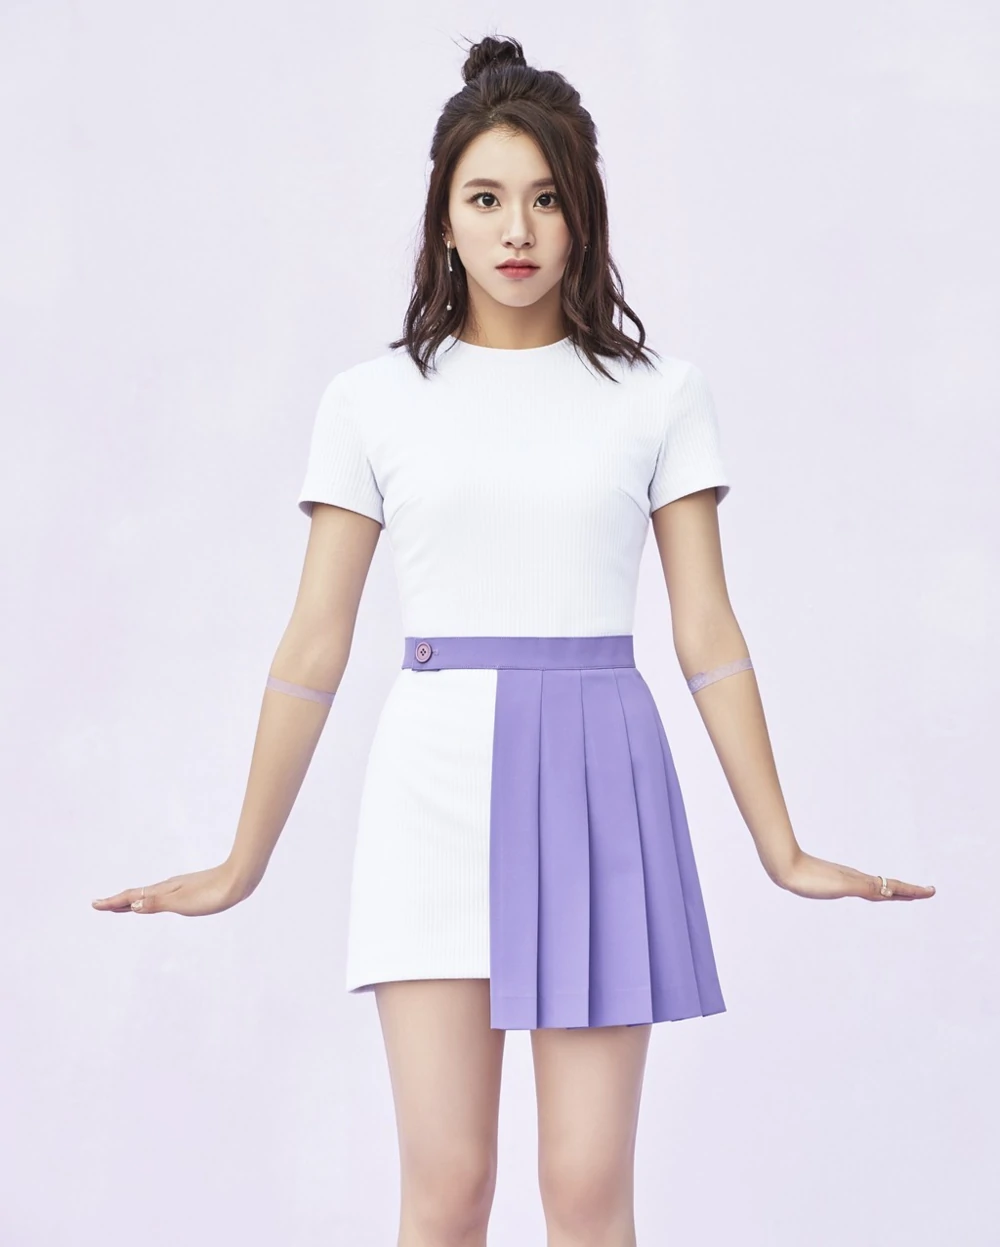 Twice Twicecoaster: Lane 1 Chaeyoung Concept Teaser Picture Image Photo Kpop K-Concept